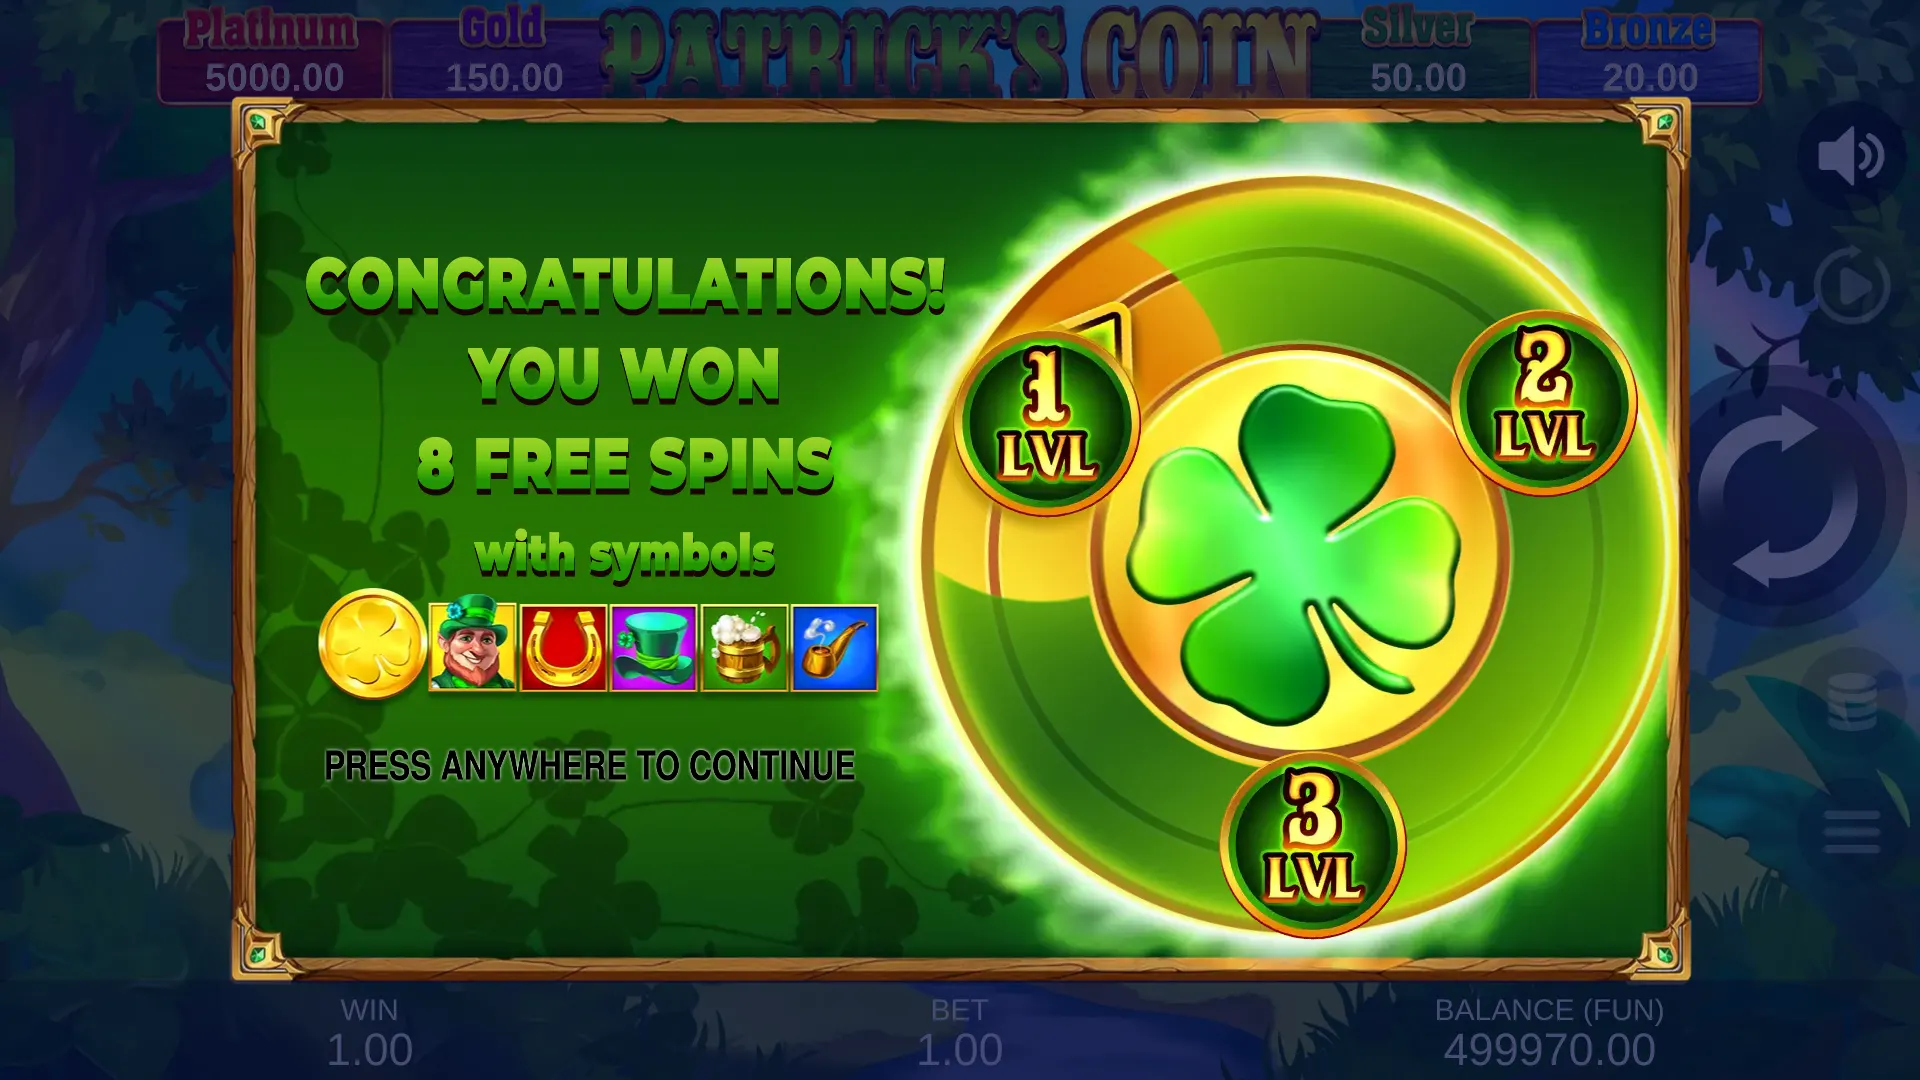 Patrick’s Coin: Hold the Spin Free Spins